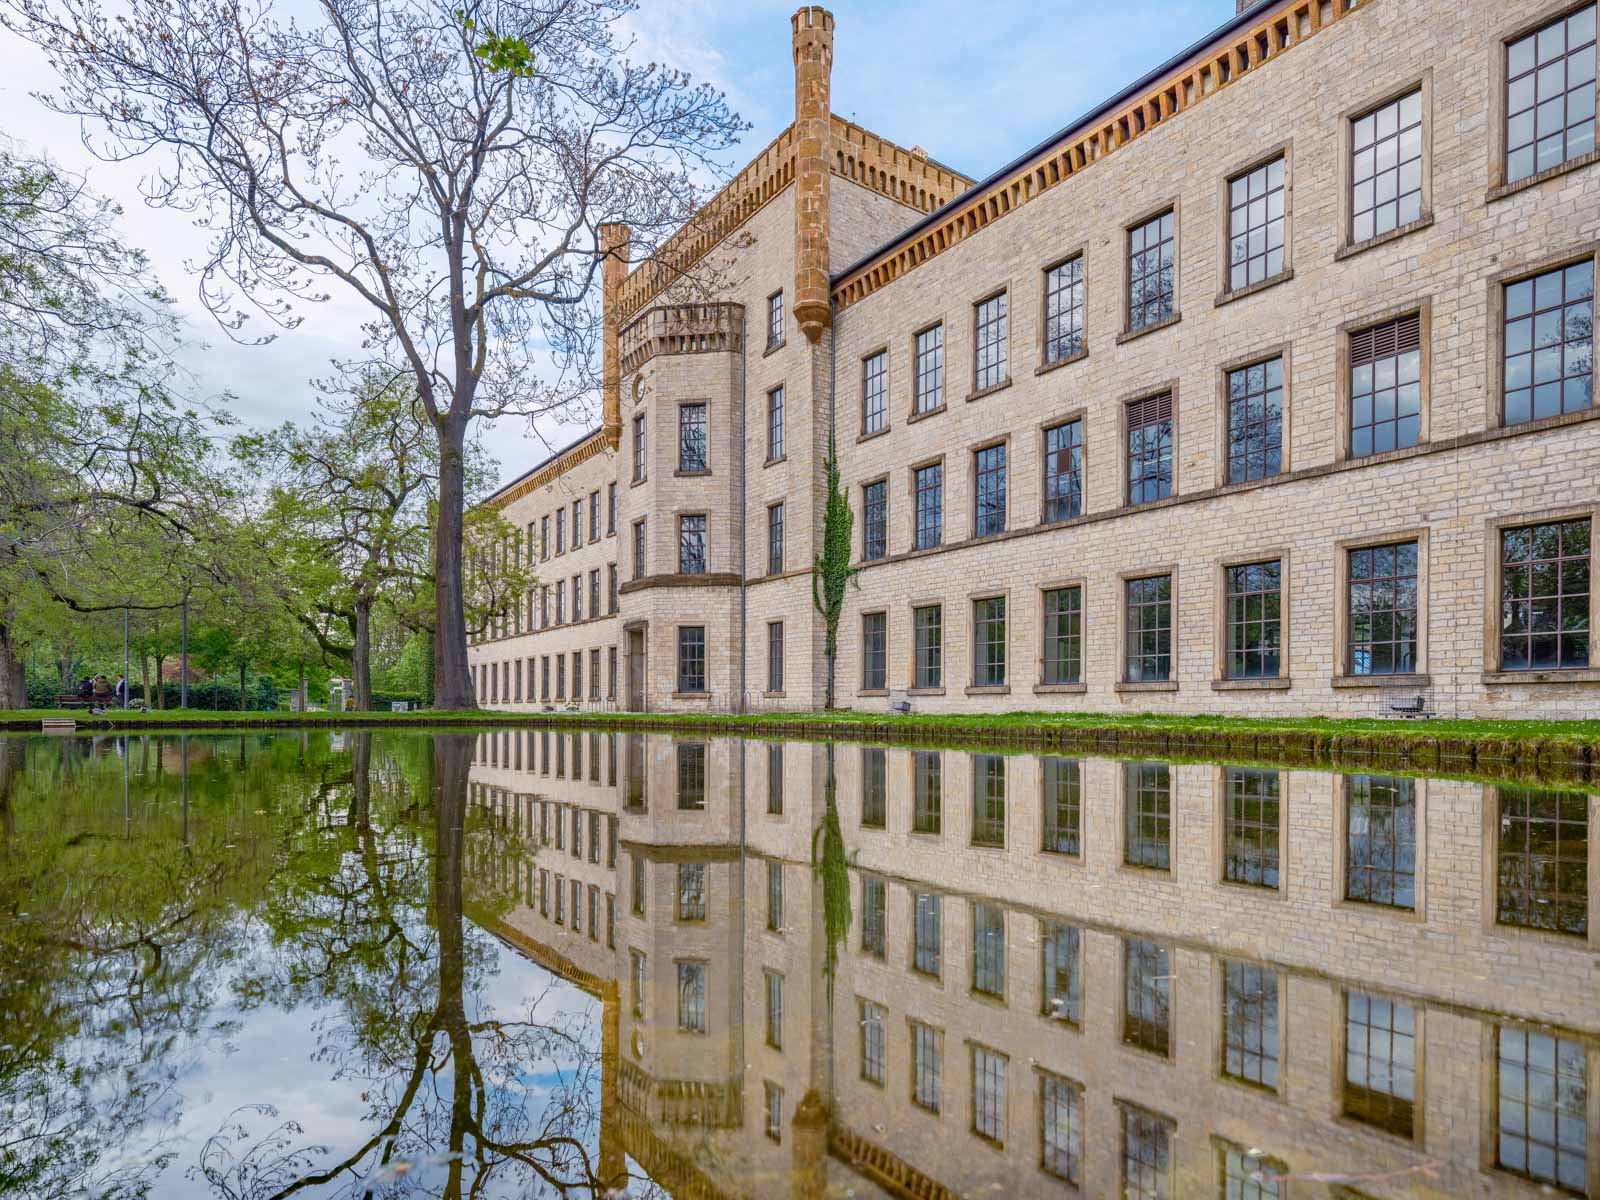 Pond in front of the old Ravensberger spinning mill (Bielefeld, Germany).